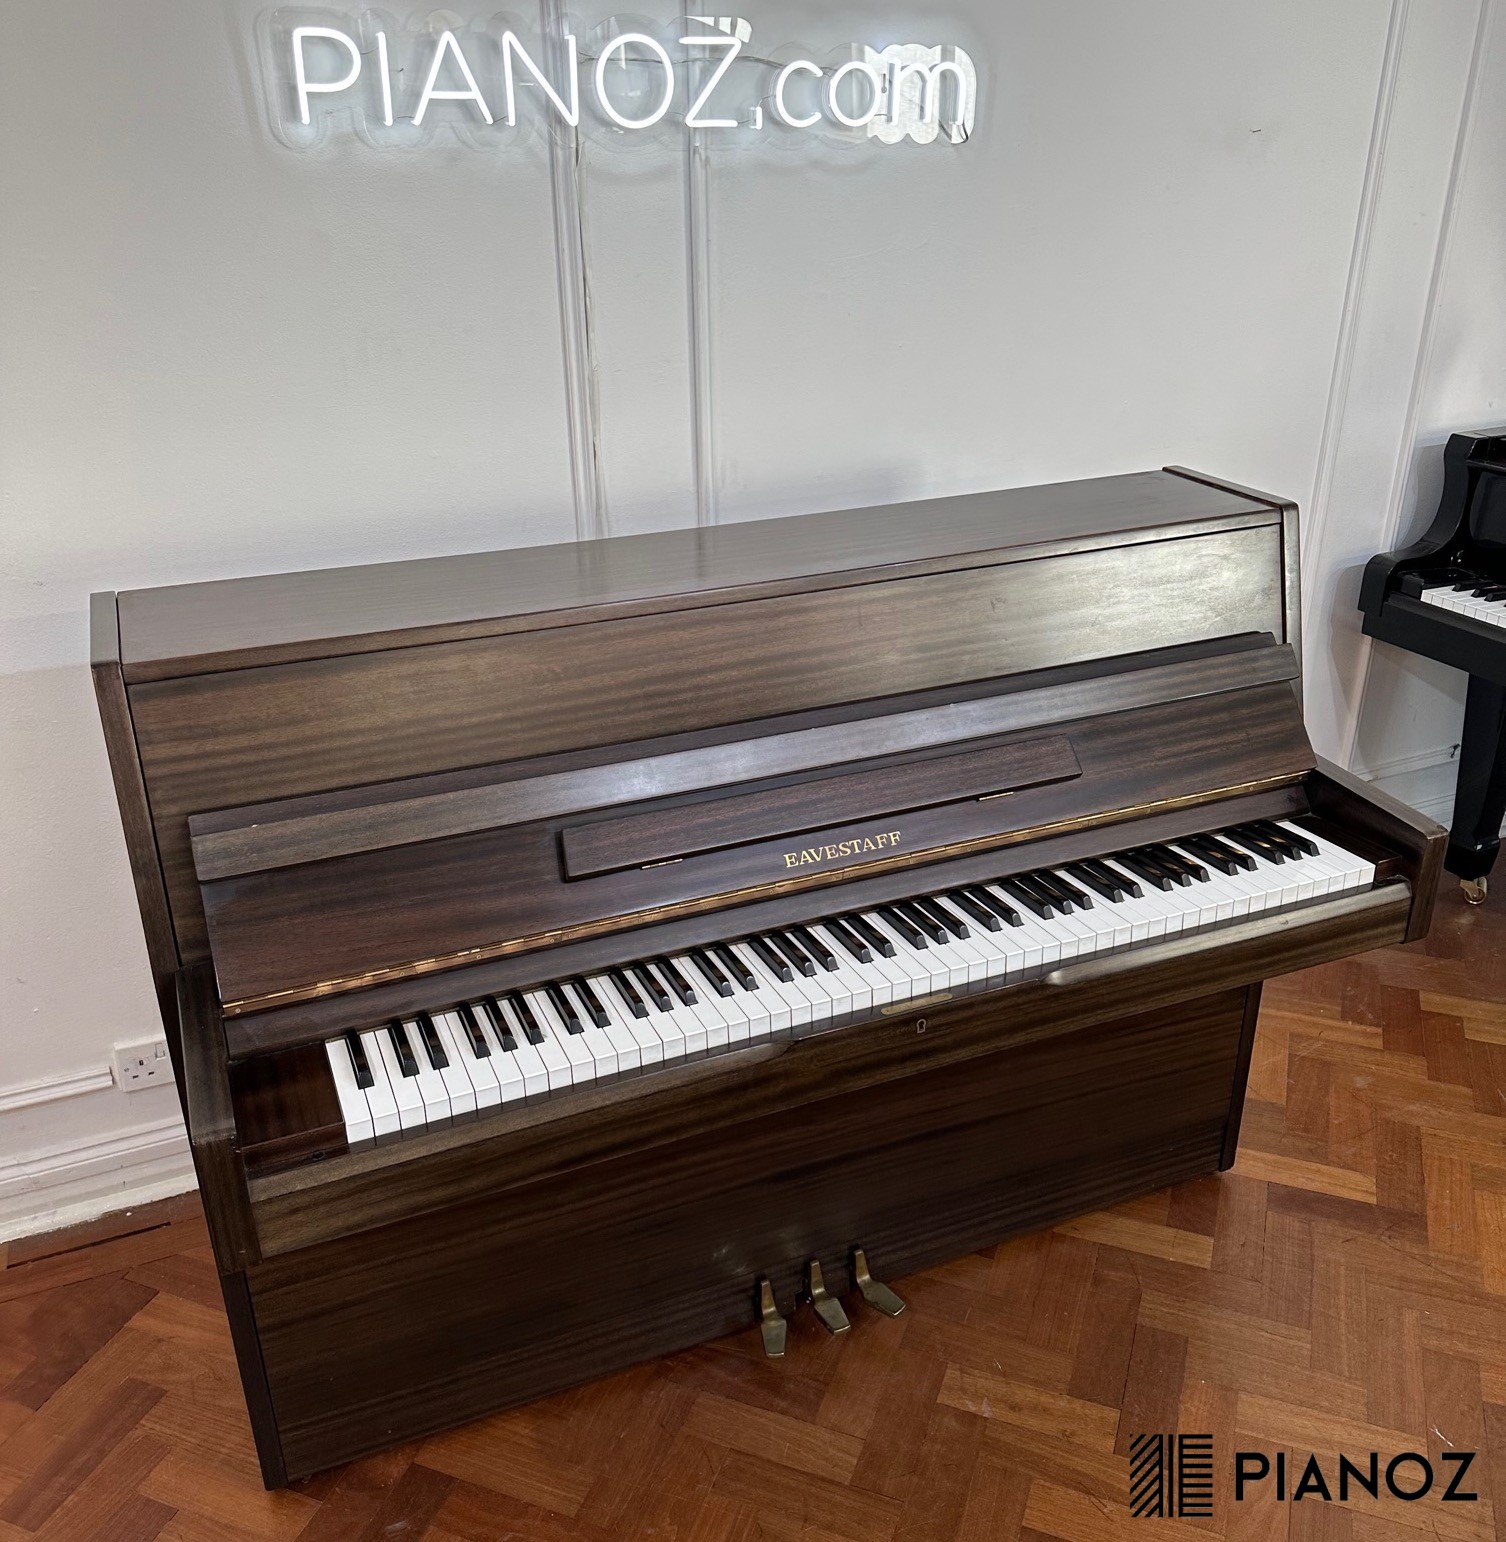 Eavestaff 108 Upright Piano piano for sale in UK